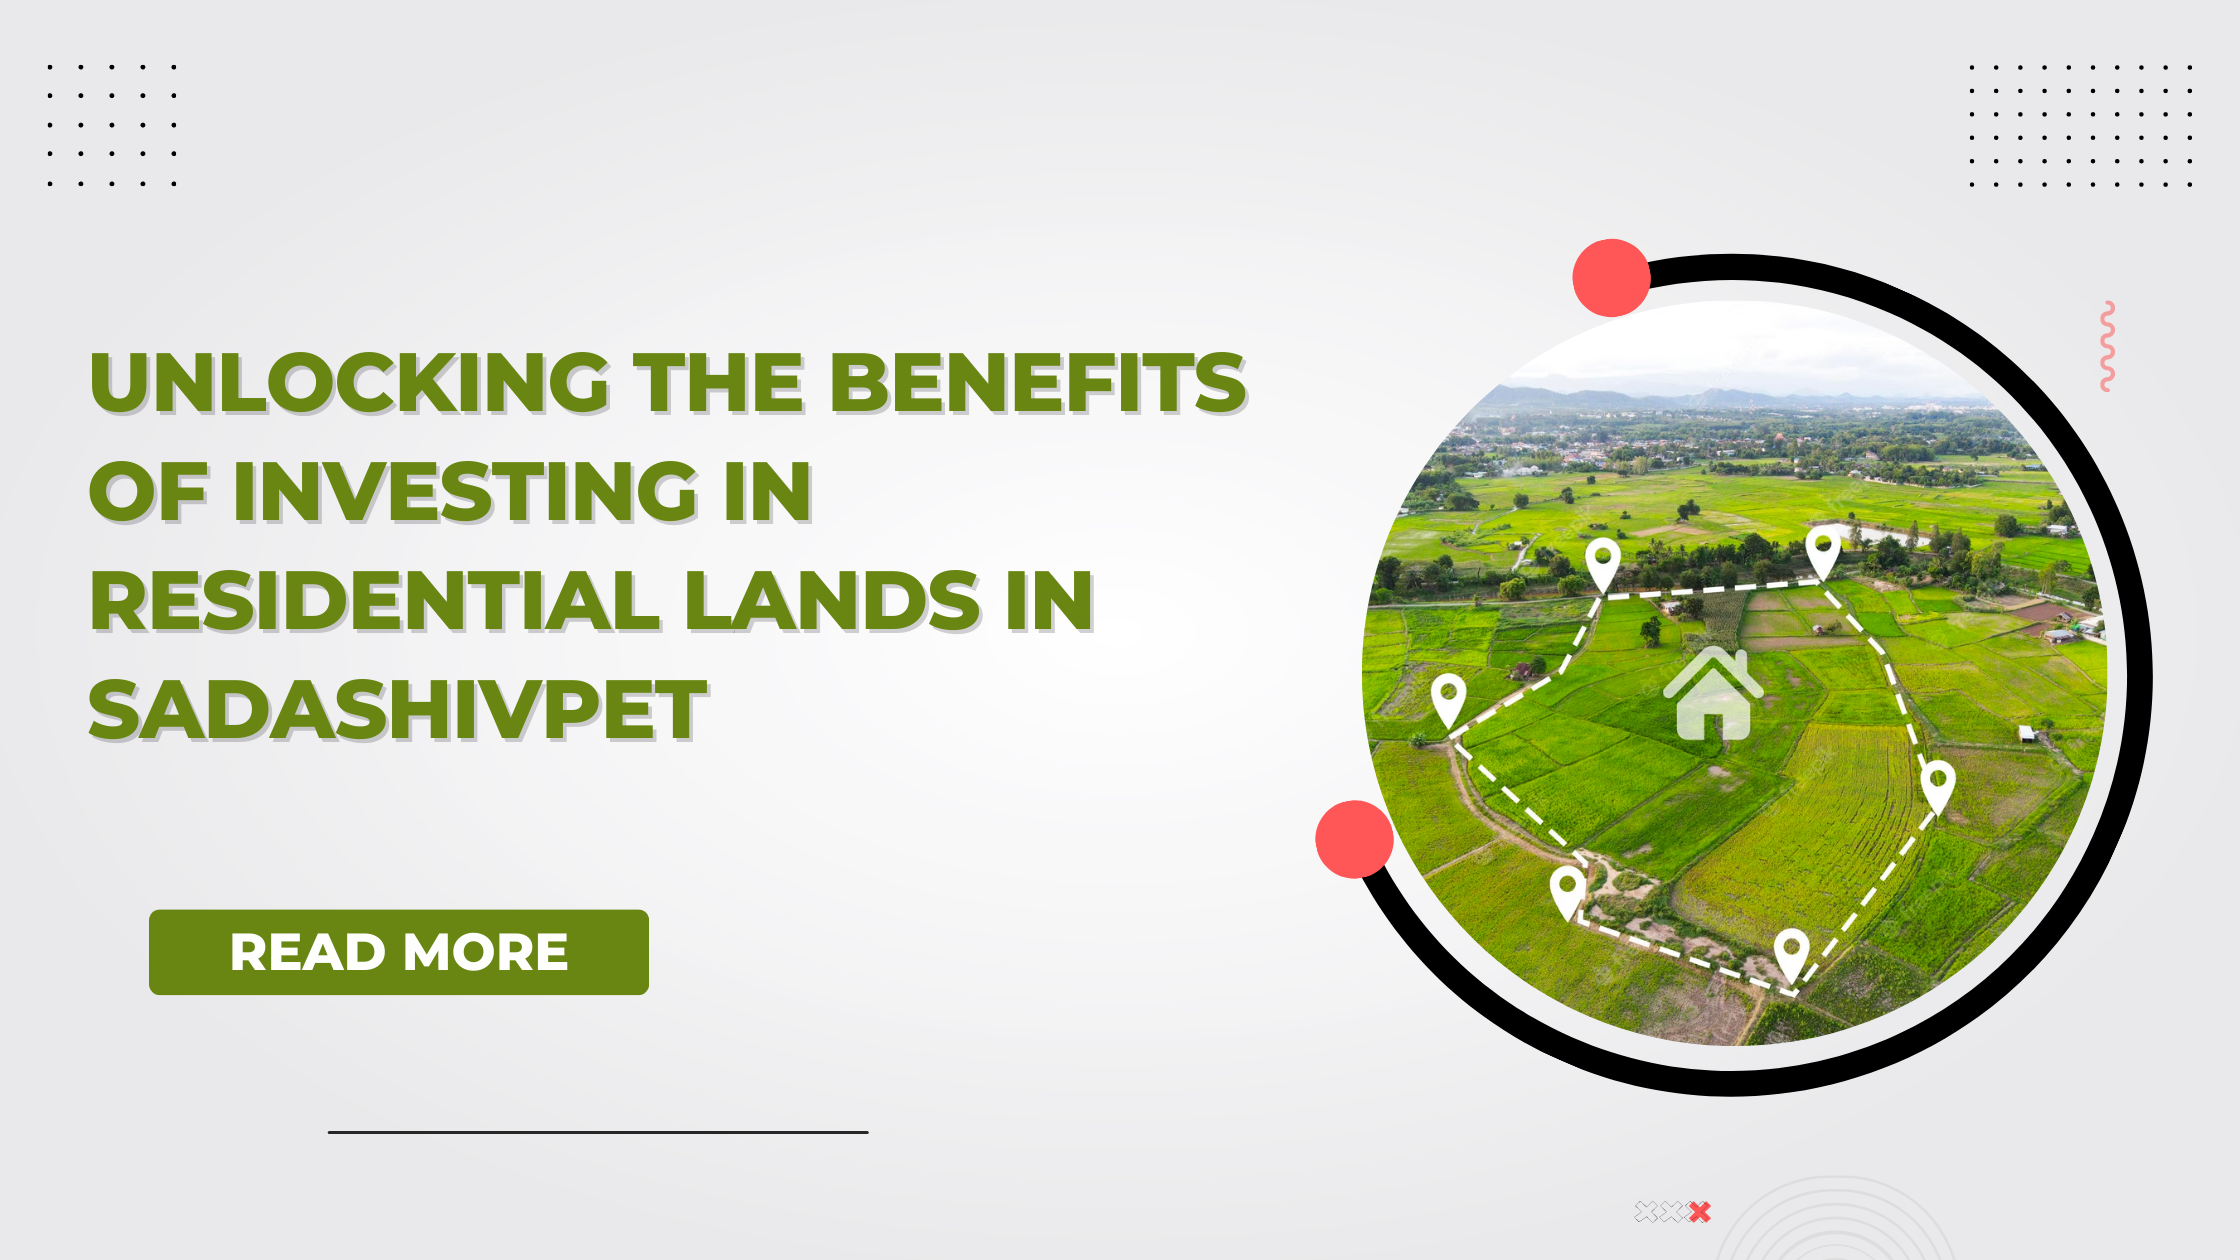 Unlocking the Benefits of Investing in Residential Lands in Sadashivpet